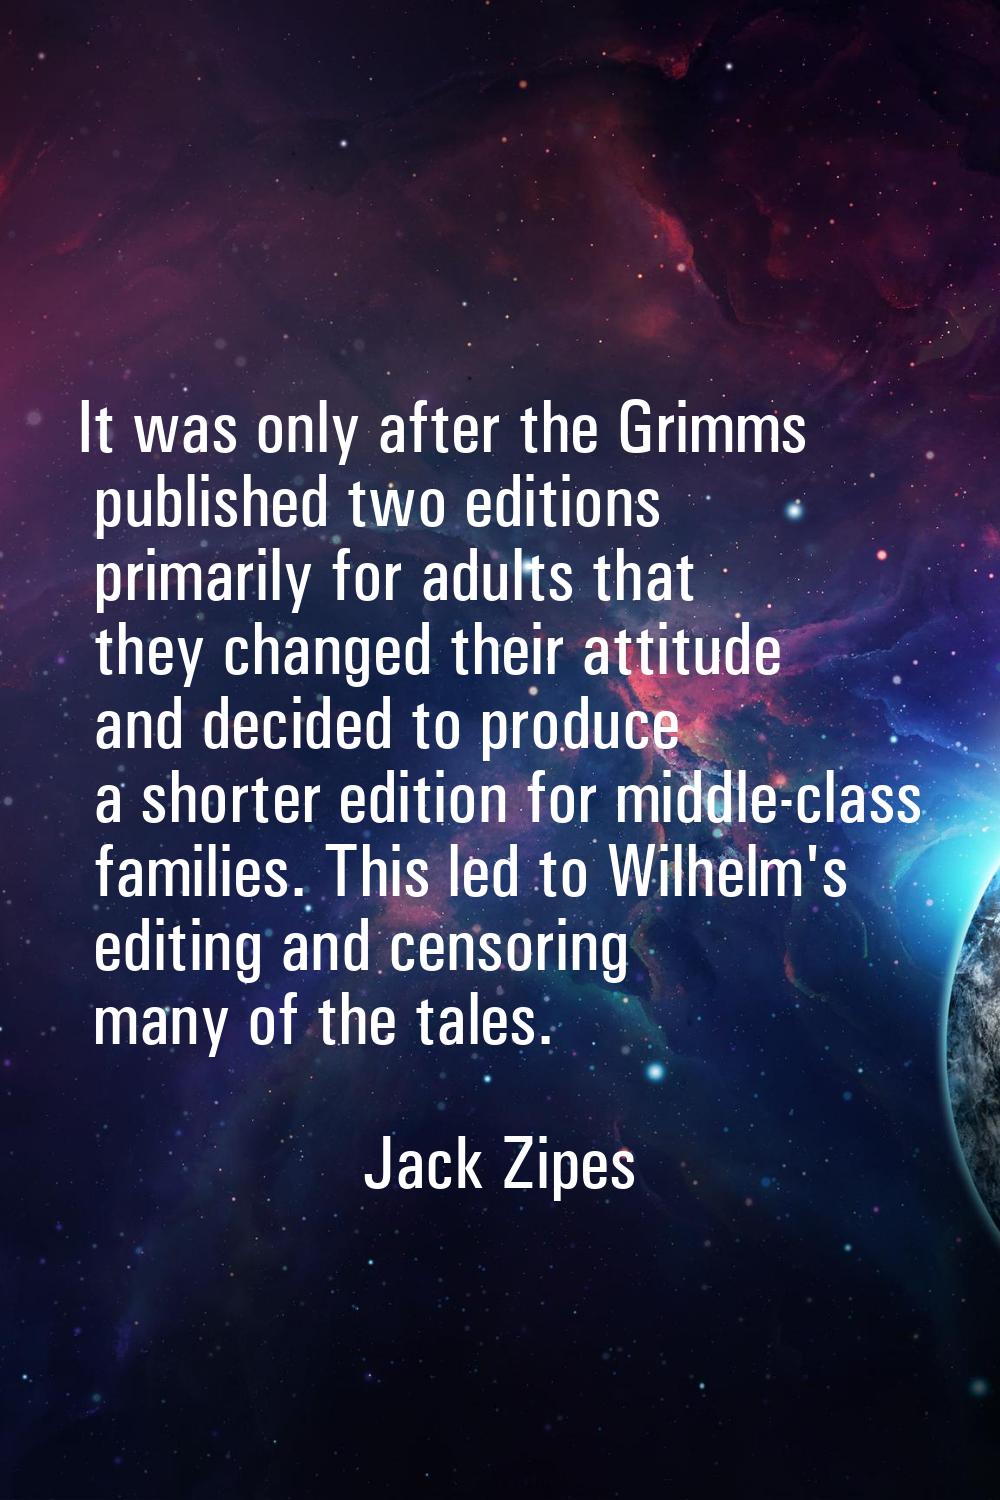 It was only after the Grimms published two editions primarily for adults that they changed their at